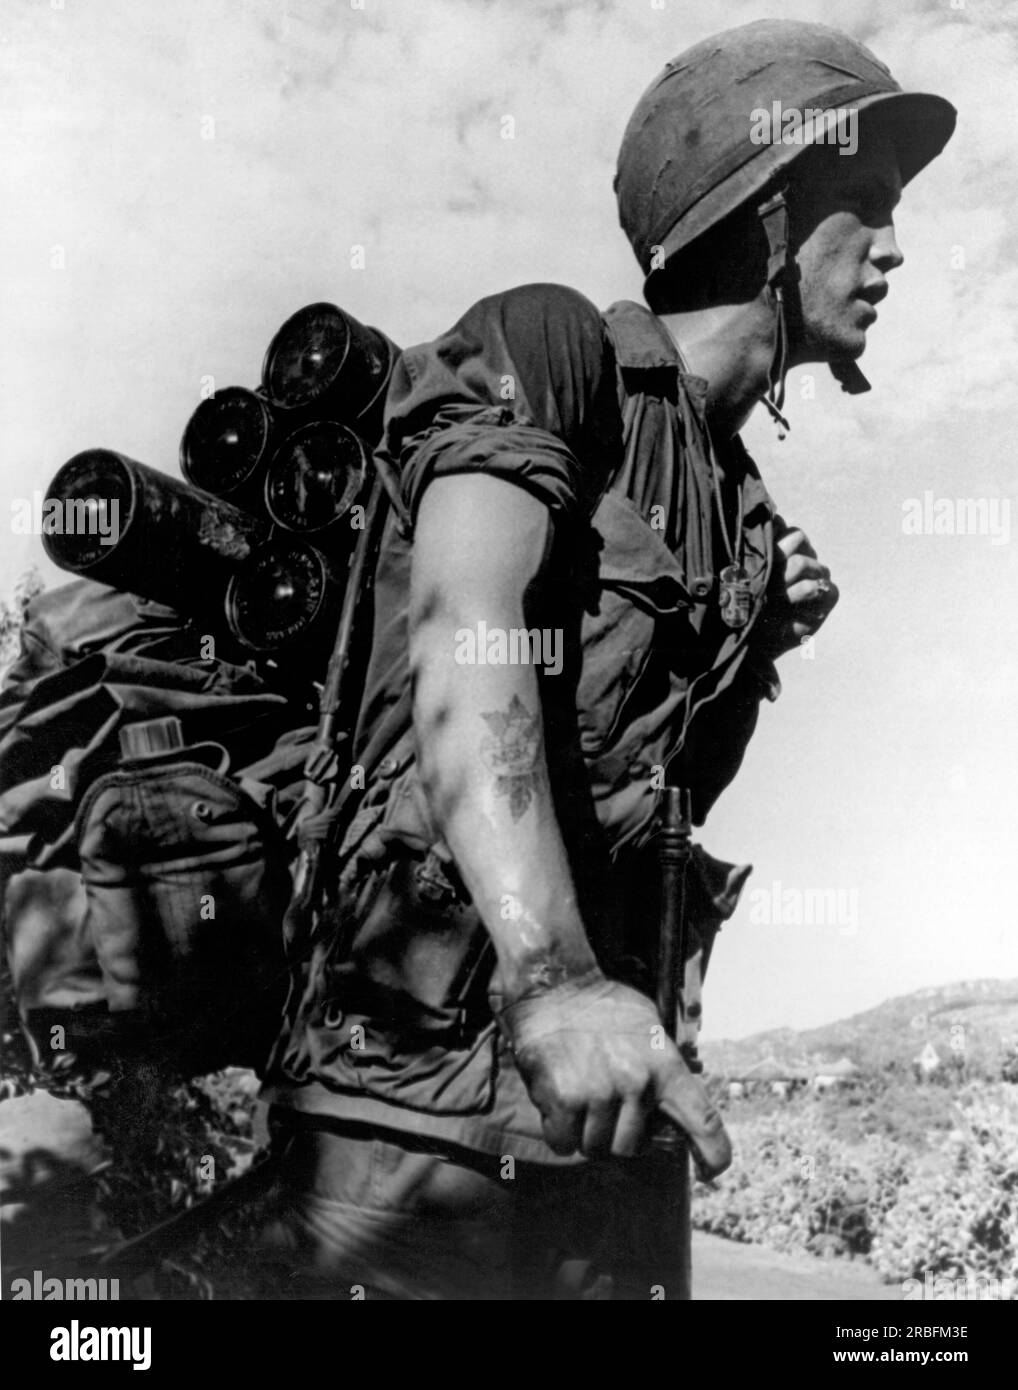 Vietnam:   August, 1966 A soldier of the 173rd Airborne Brigade carrying a load of five mortar rounds, four canteens, poncho and an entrenching tool on a search and destroy mission. Stock Photo